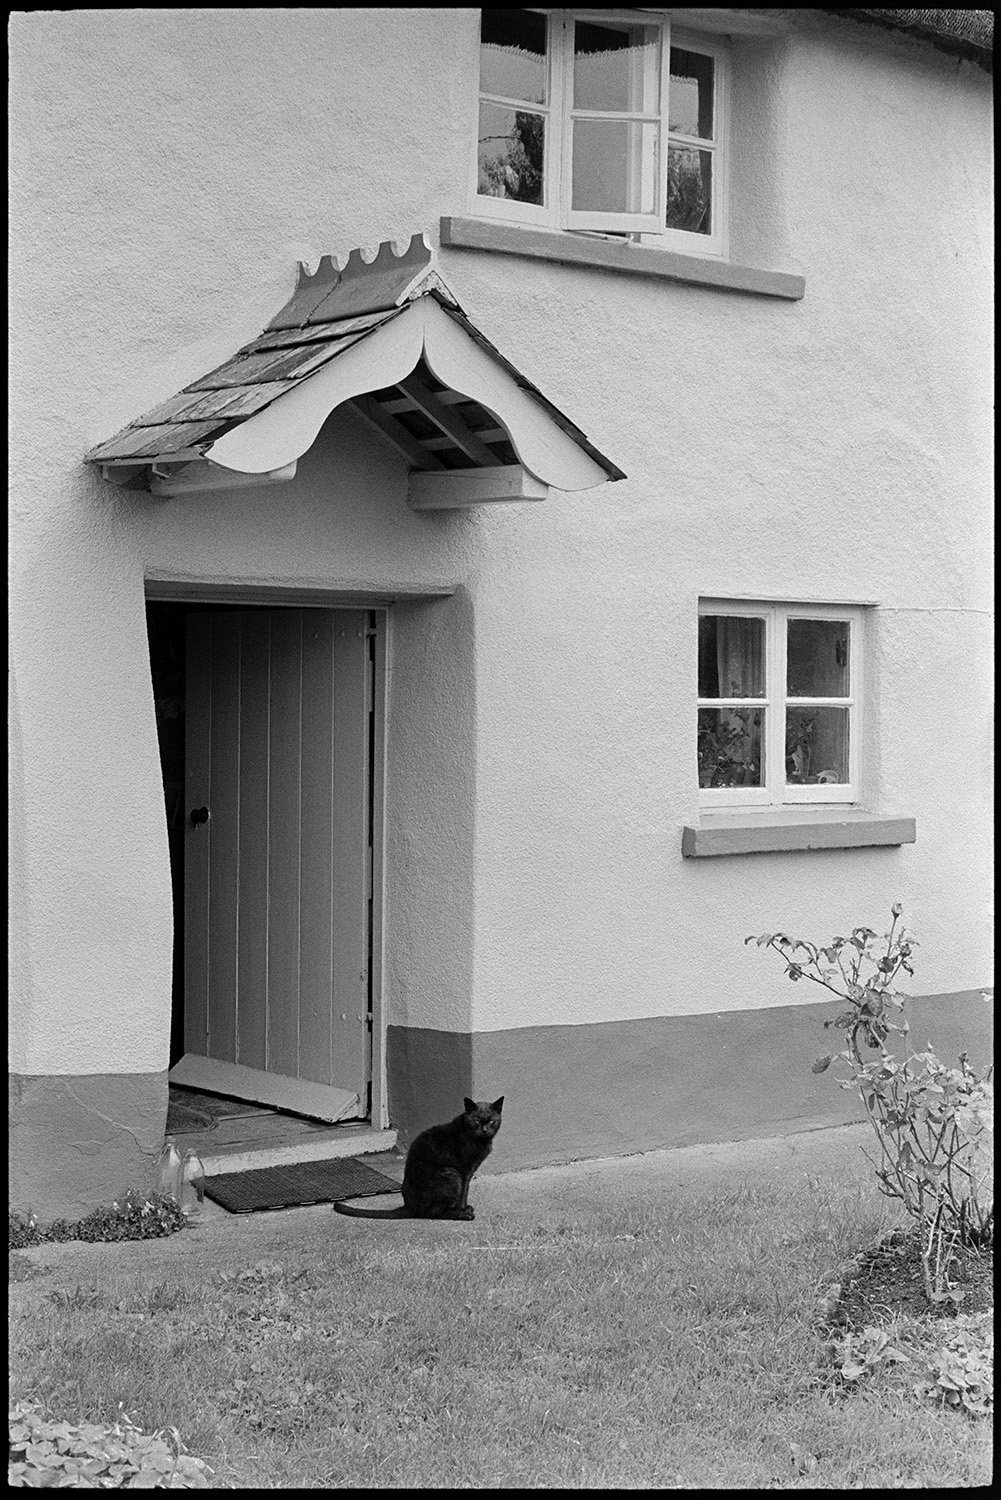 Cottage door with porch and cat.
[A black cat sitting outside an open front door of a cottage at Iddesleigh, with a slated porch.]